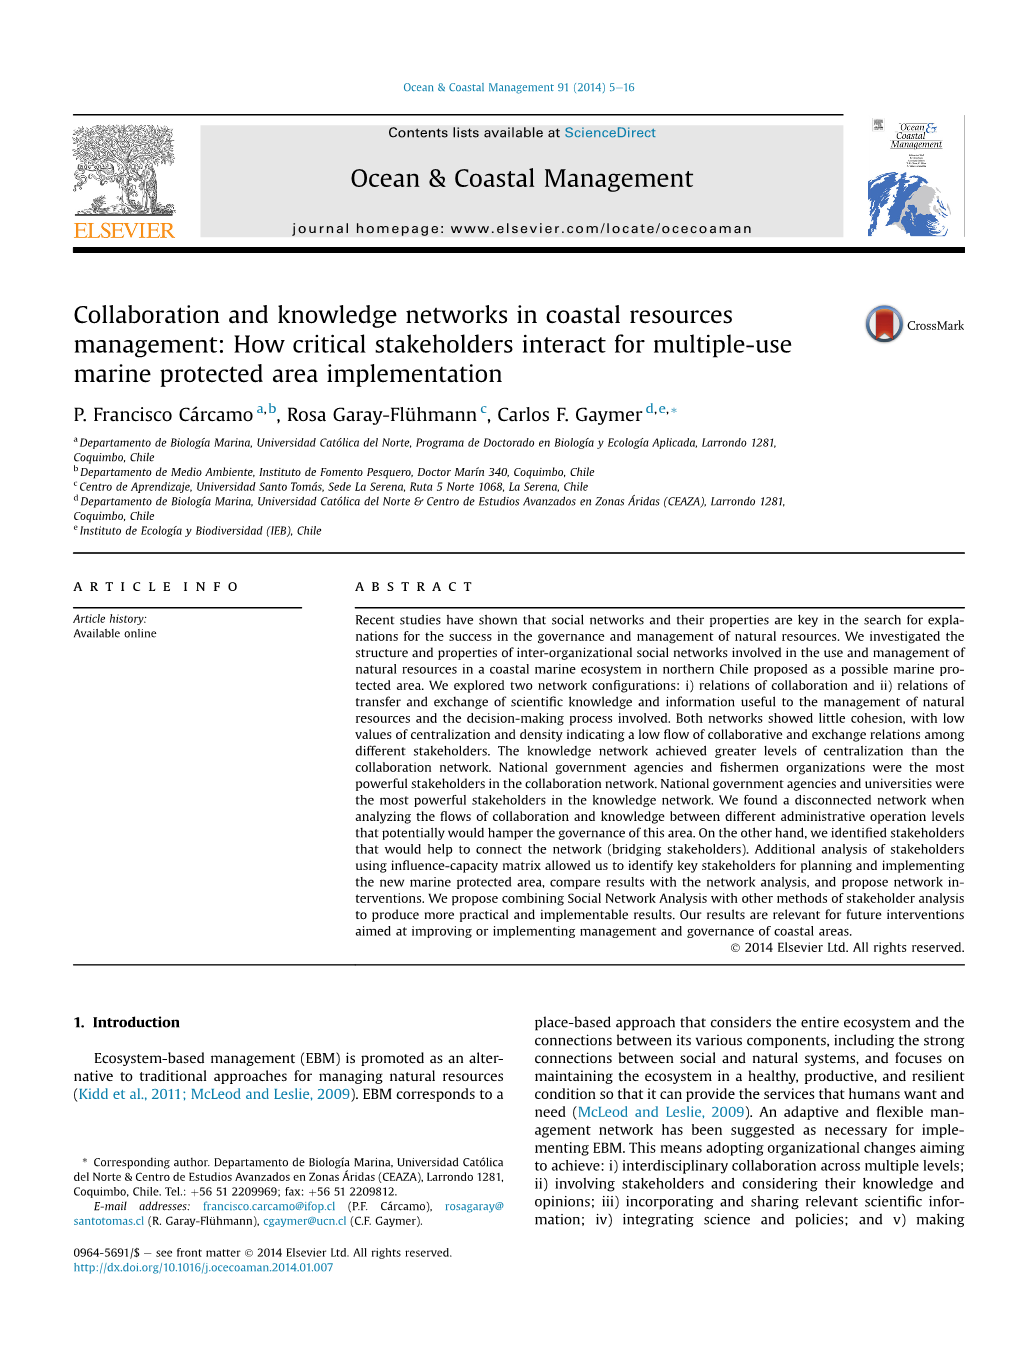 How Critical Stakeholders Interact for Multiple-Use Marine Protected Area Implementation